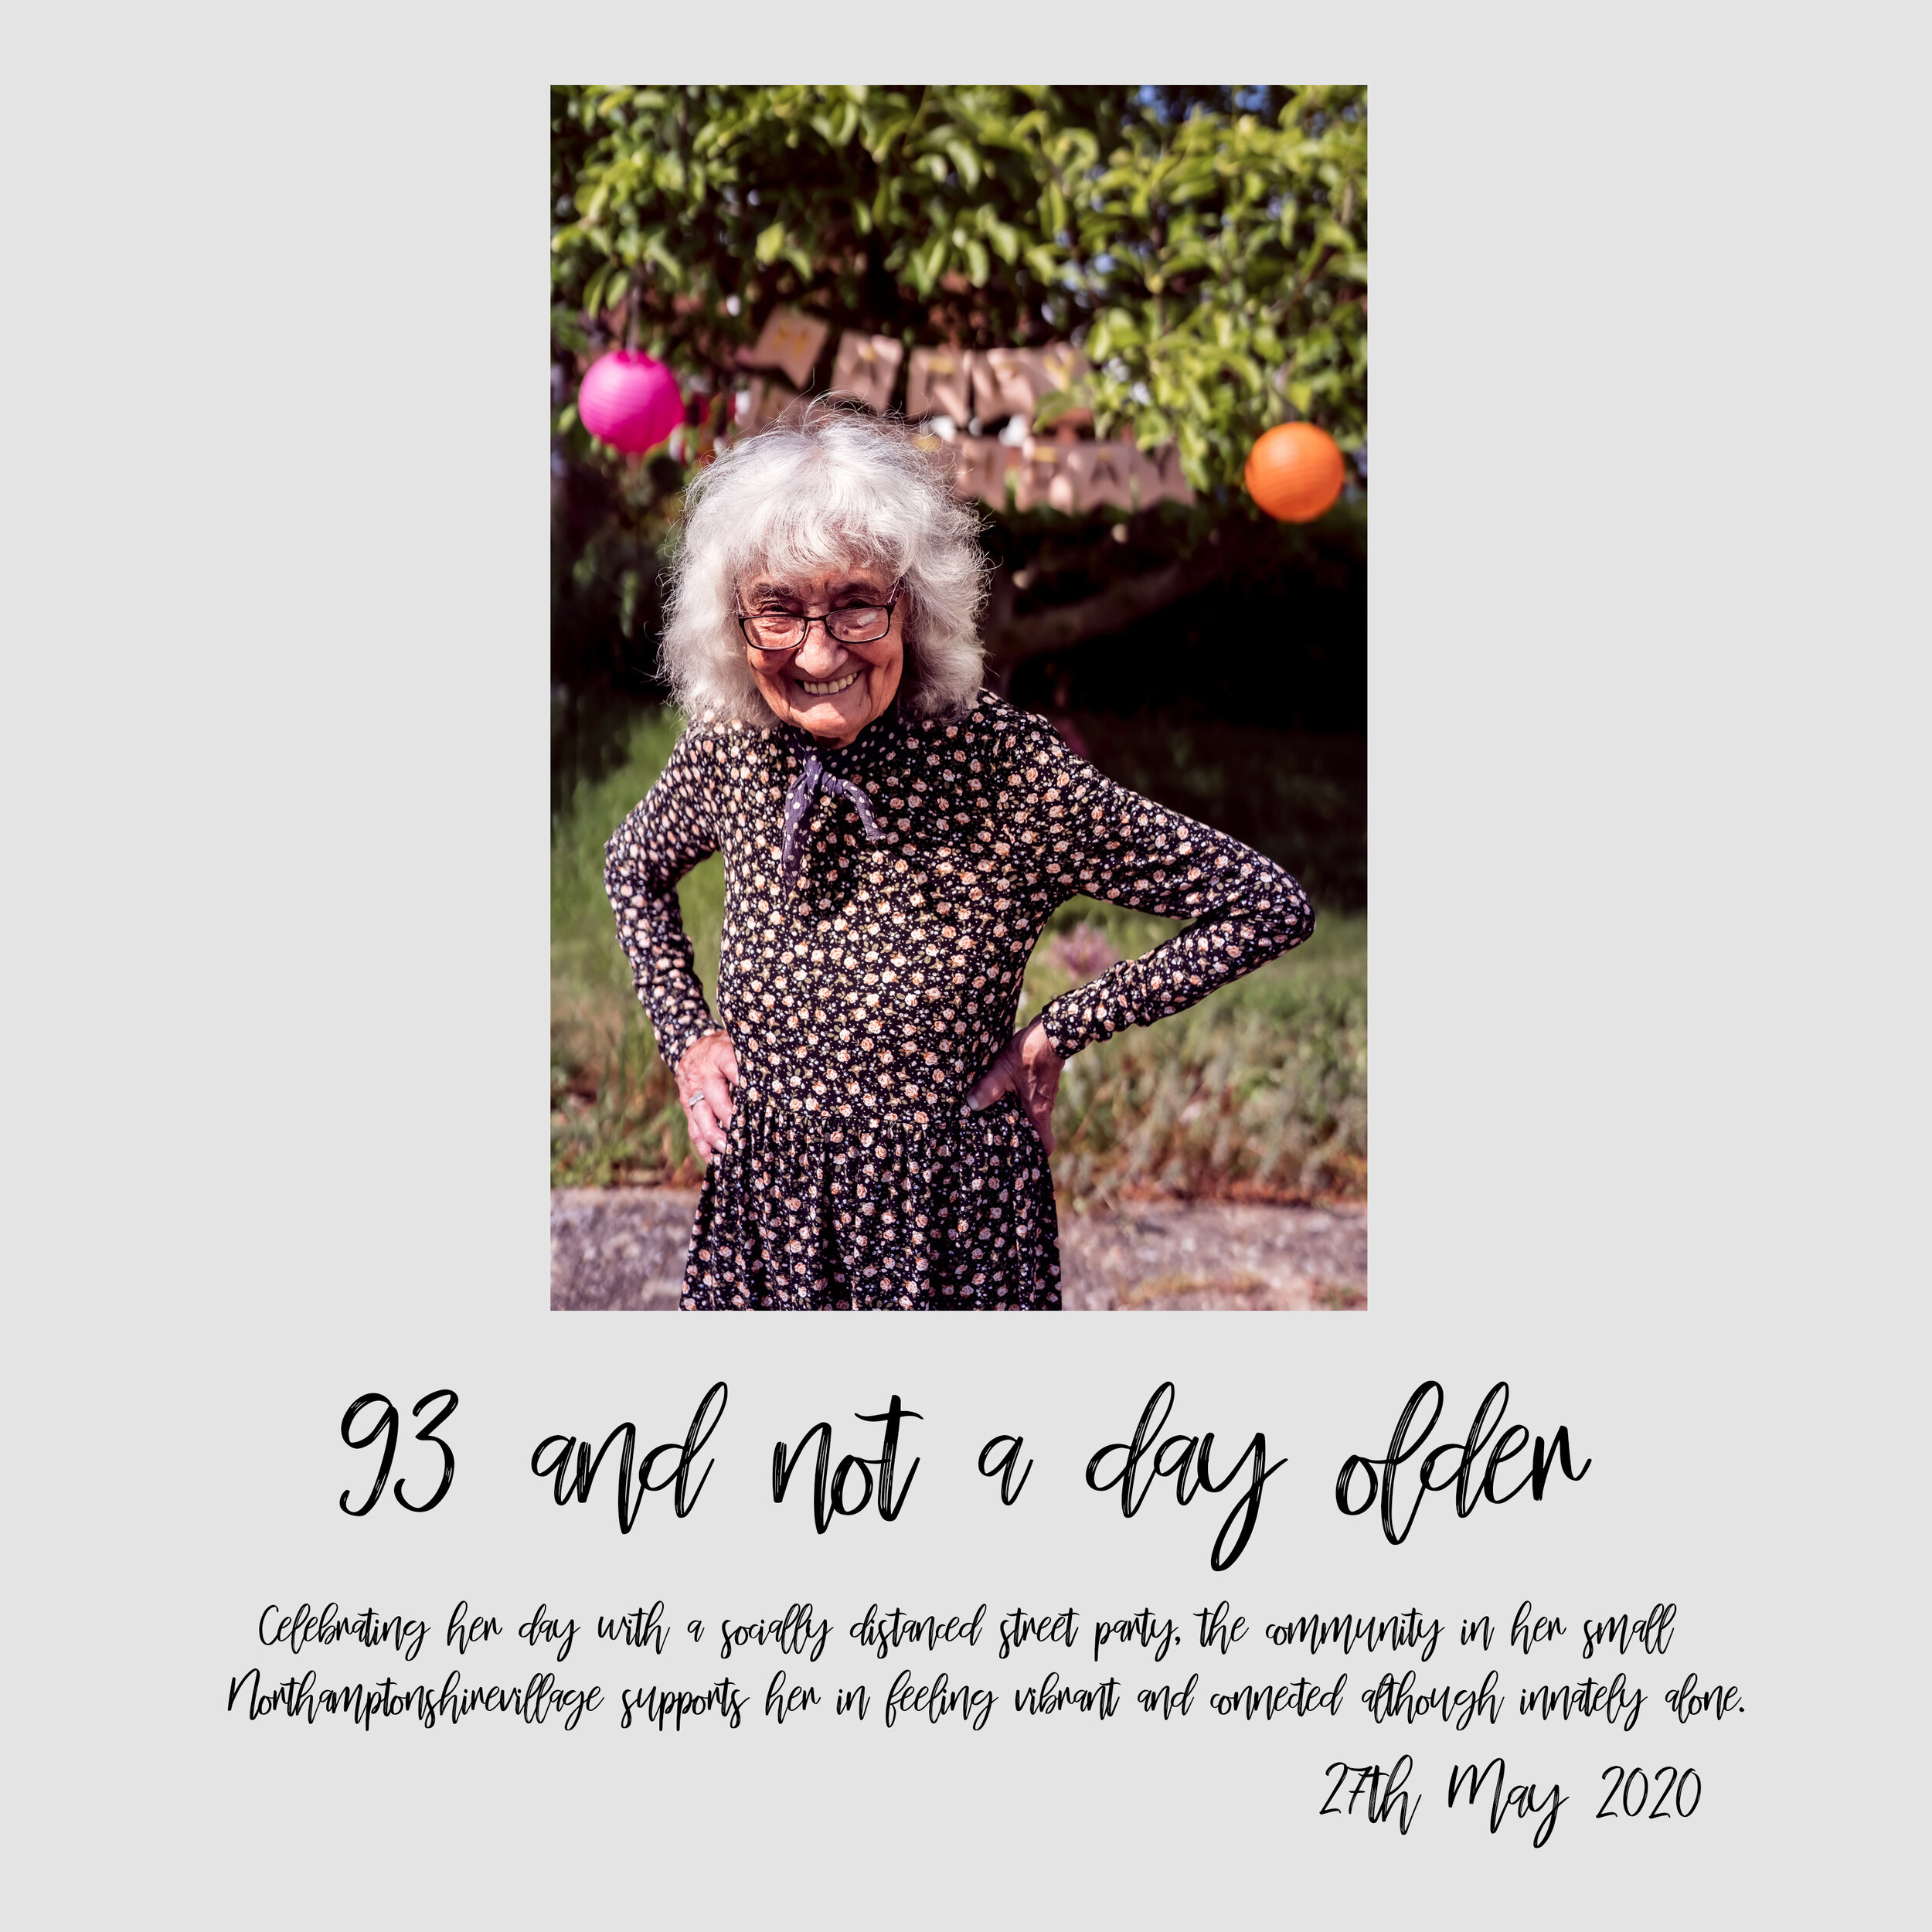 93 and not a day older - IG.jpg